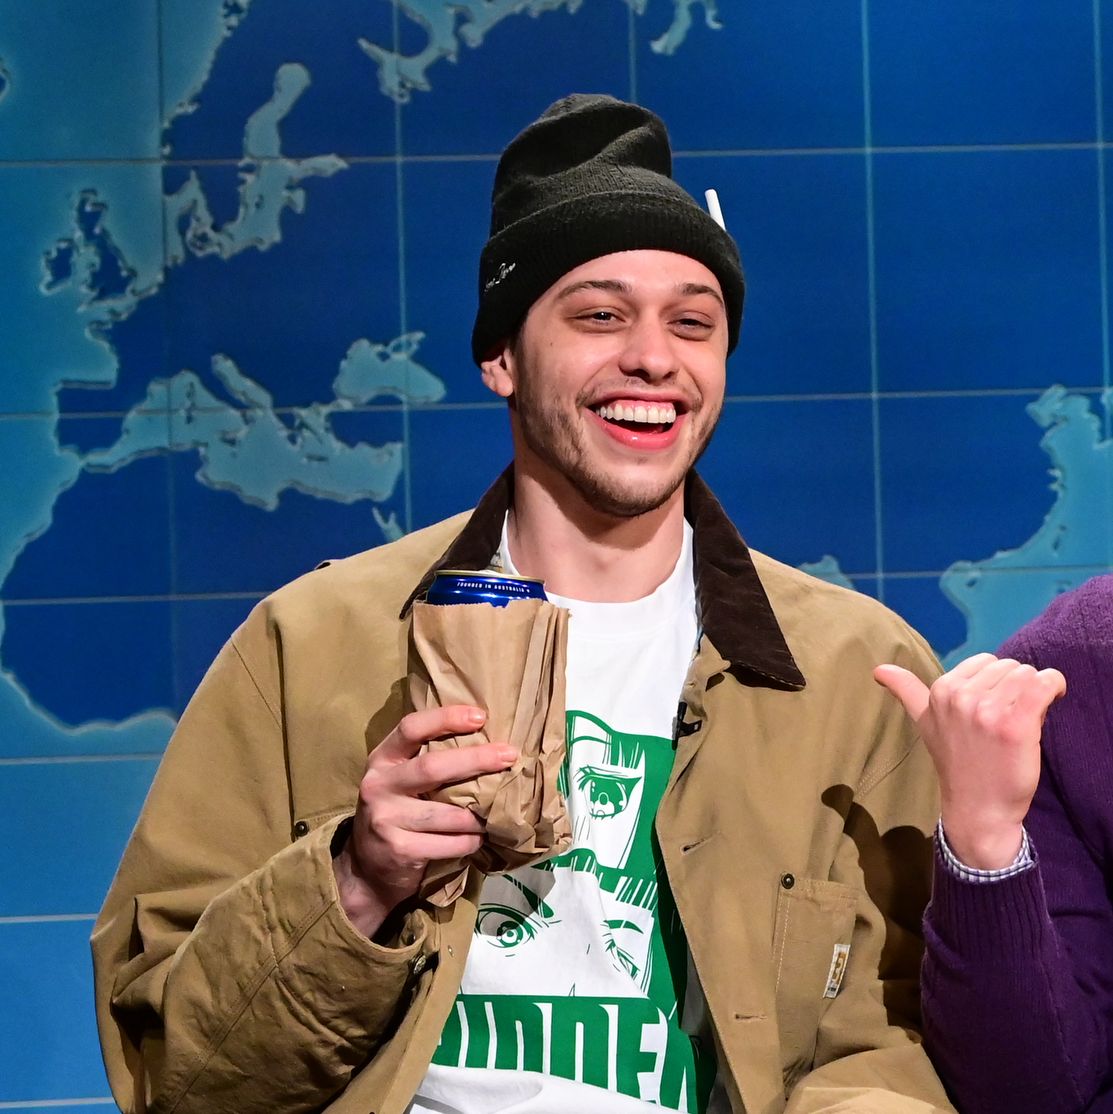 Pete Davidson Is Looking to Buy a Home in L.A. to Be Closer to Kim Kardashian